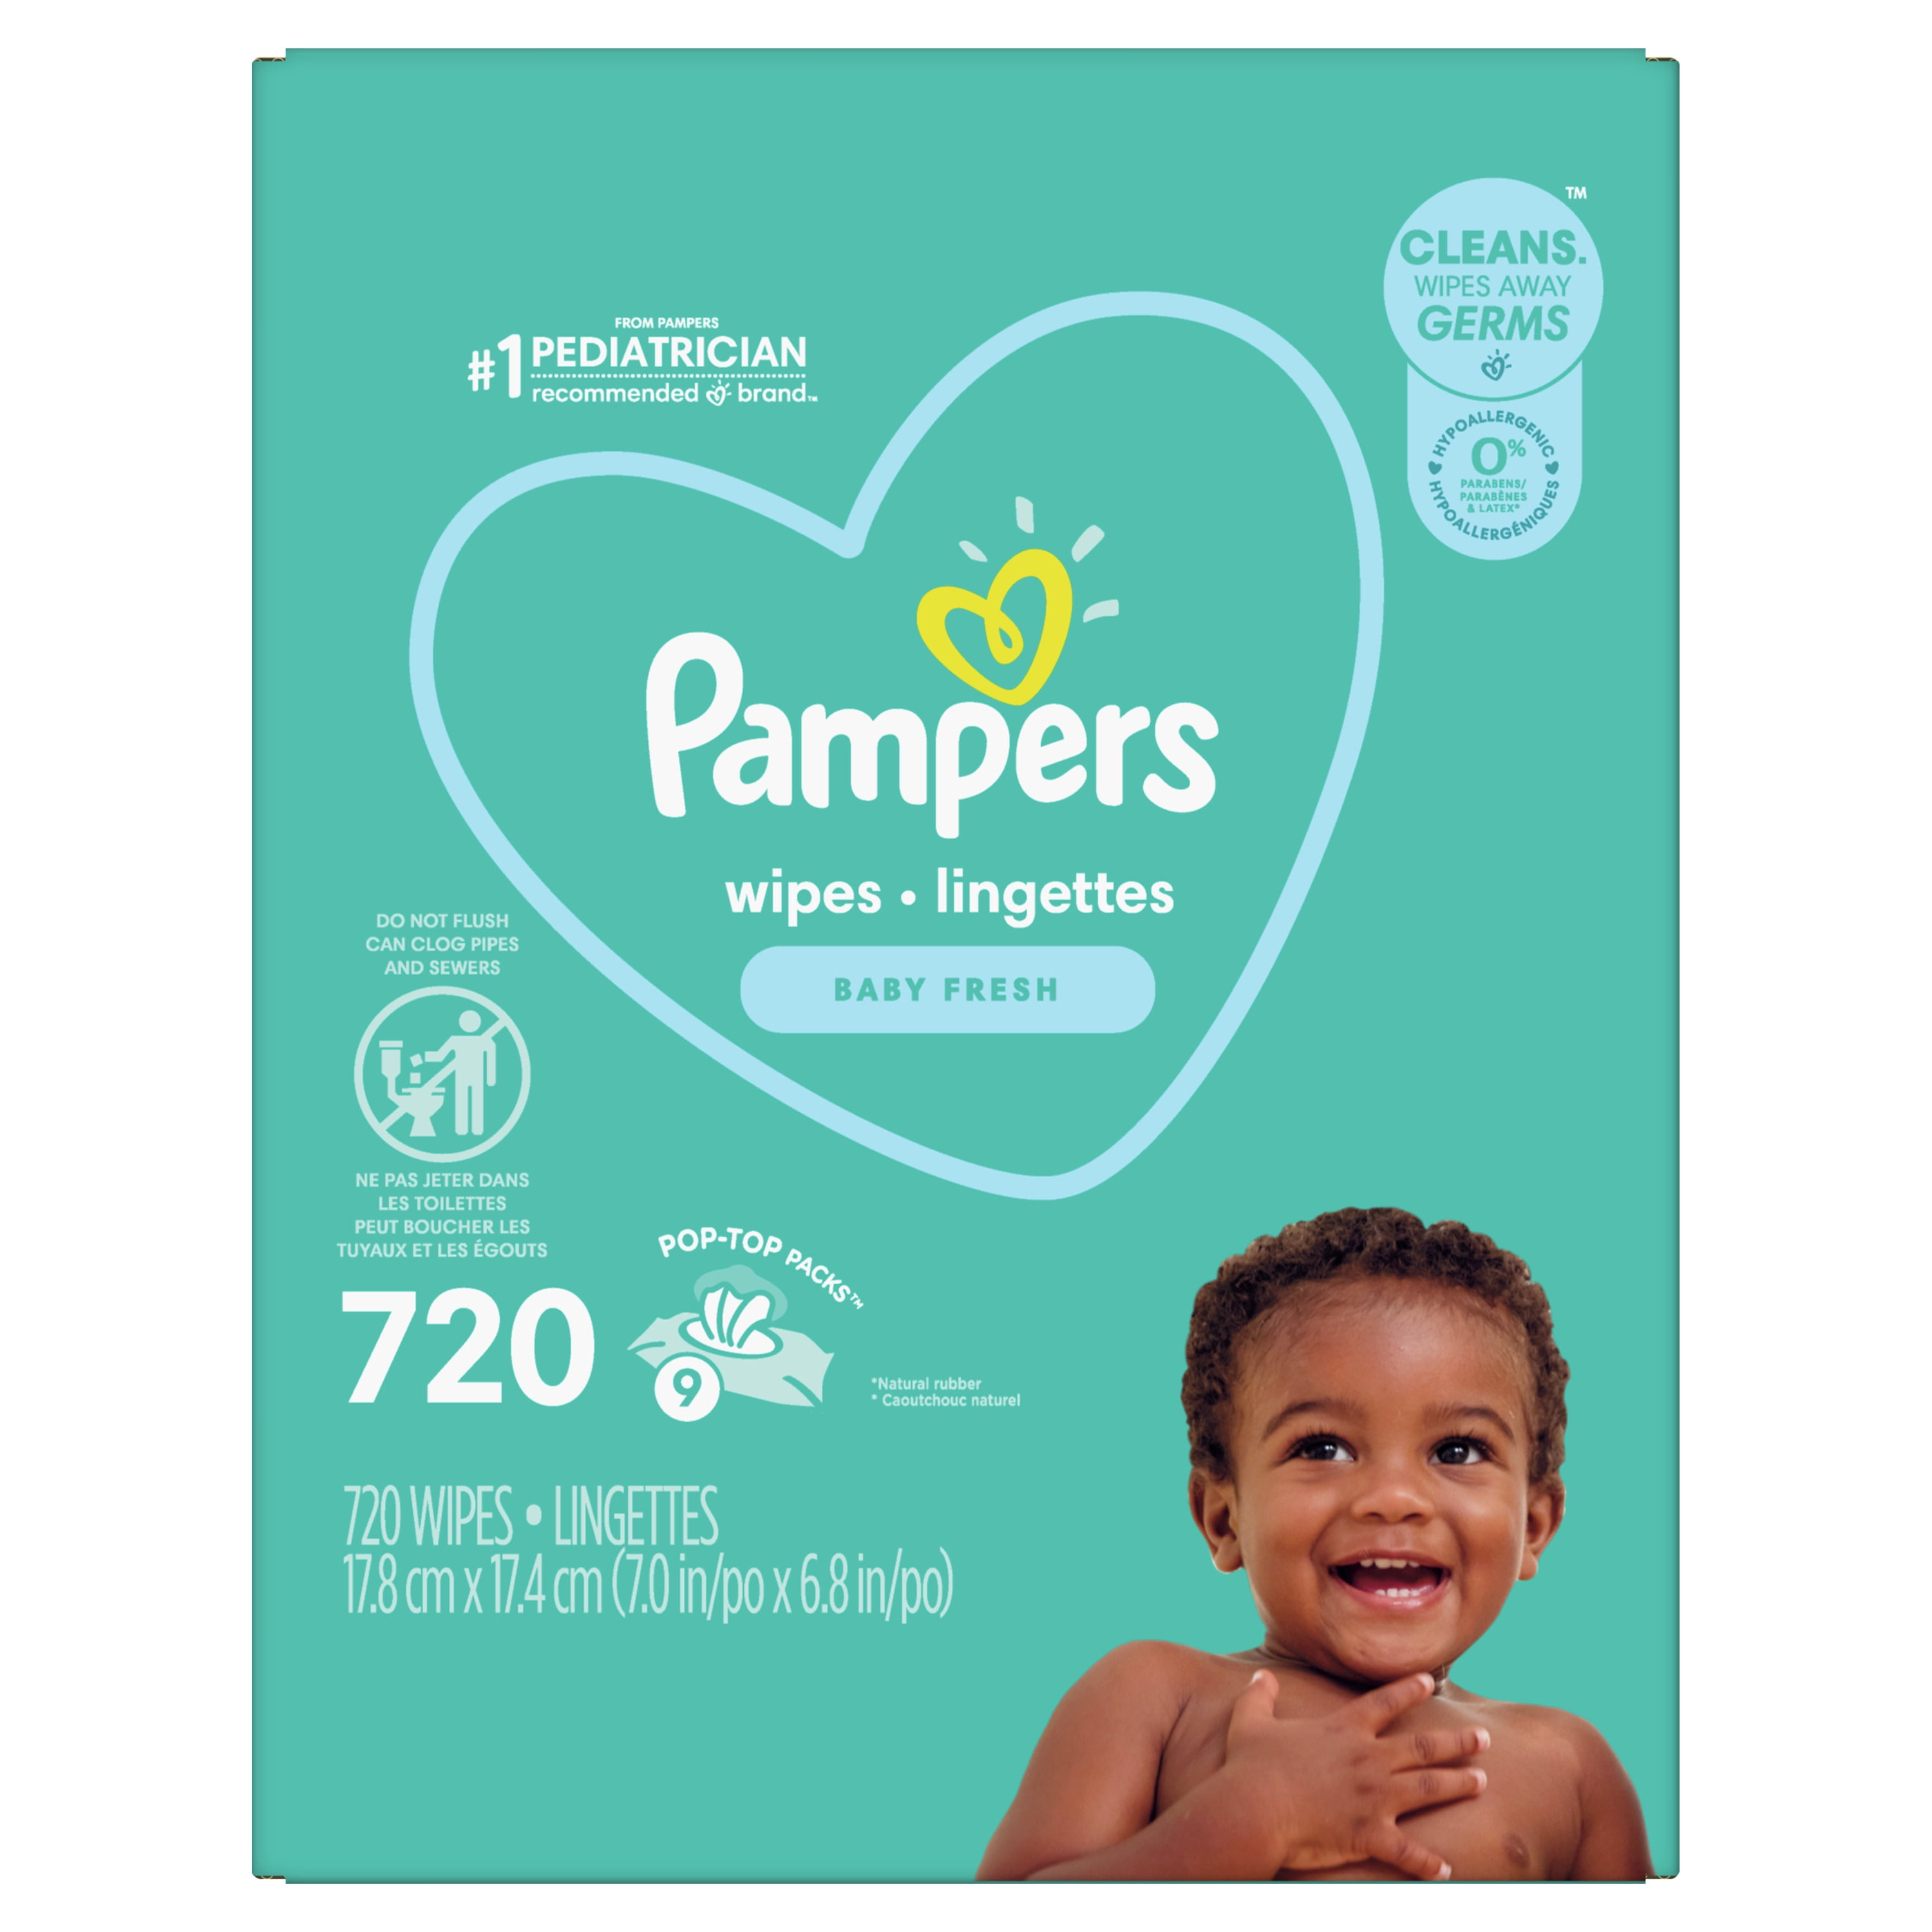 Pampers Baby Wipes Complete Clean SCENTED 3X Pop-Top 216 Count Procter and Gamble